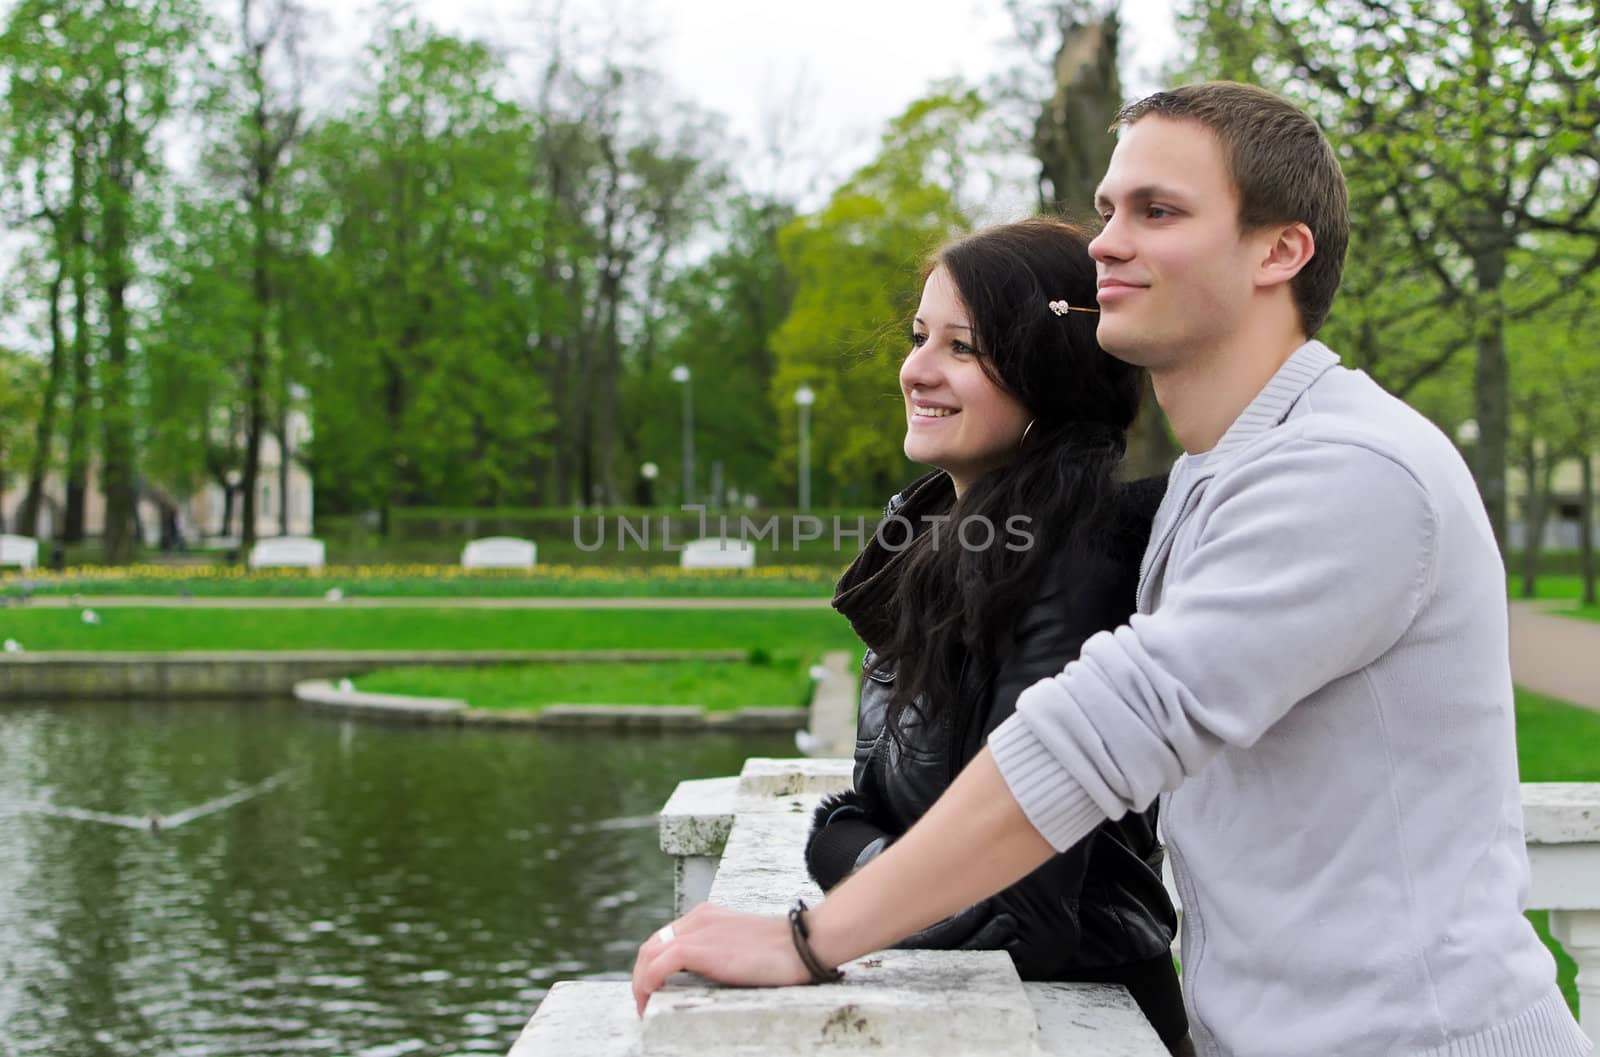 Cute couple looking at a pond in the park by dmitrimaruta